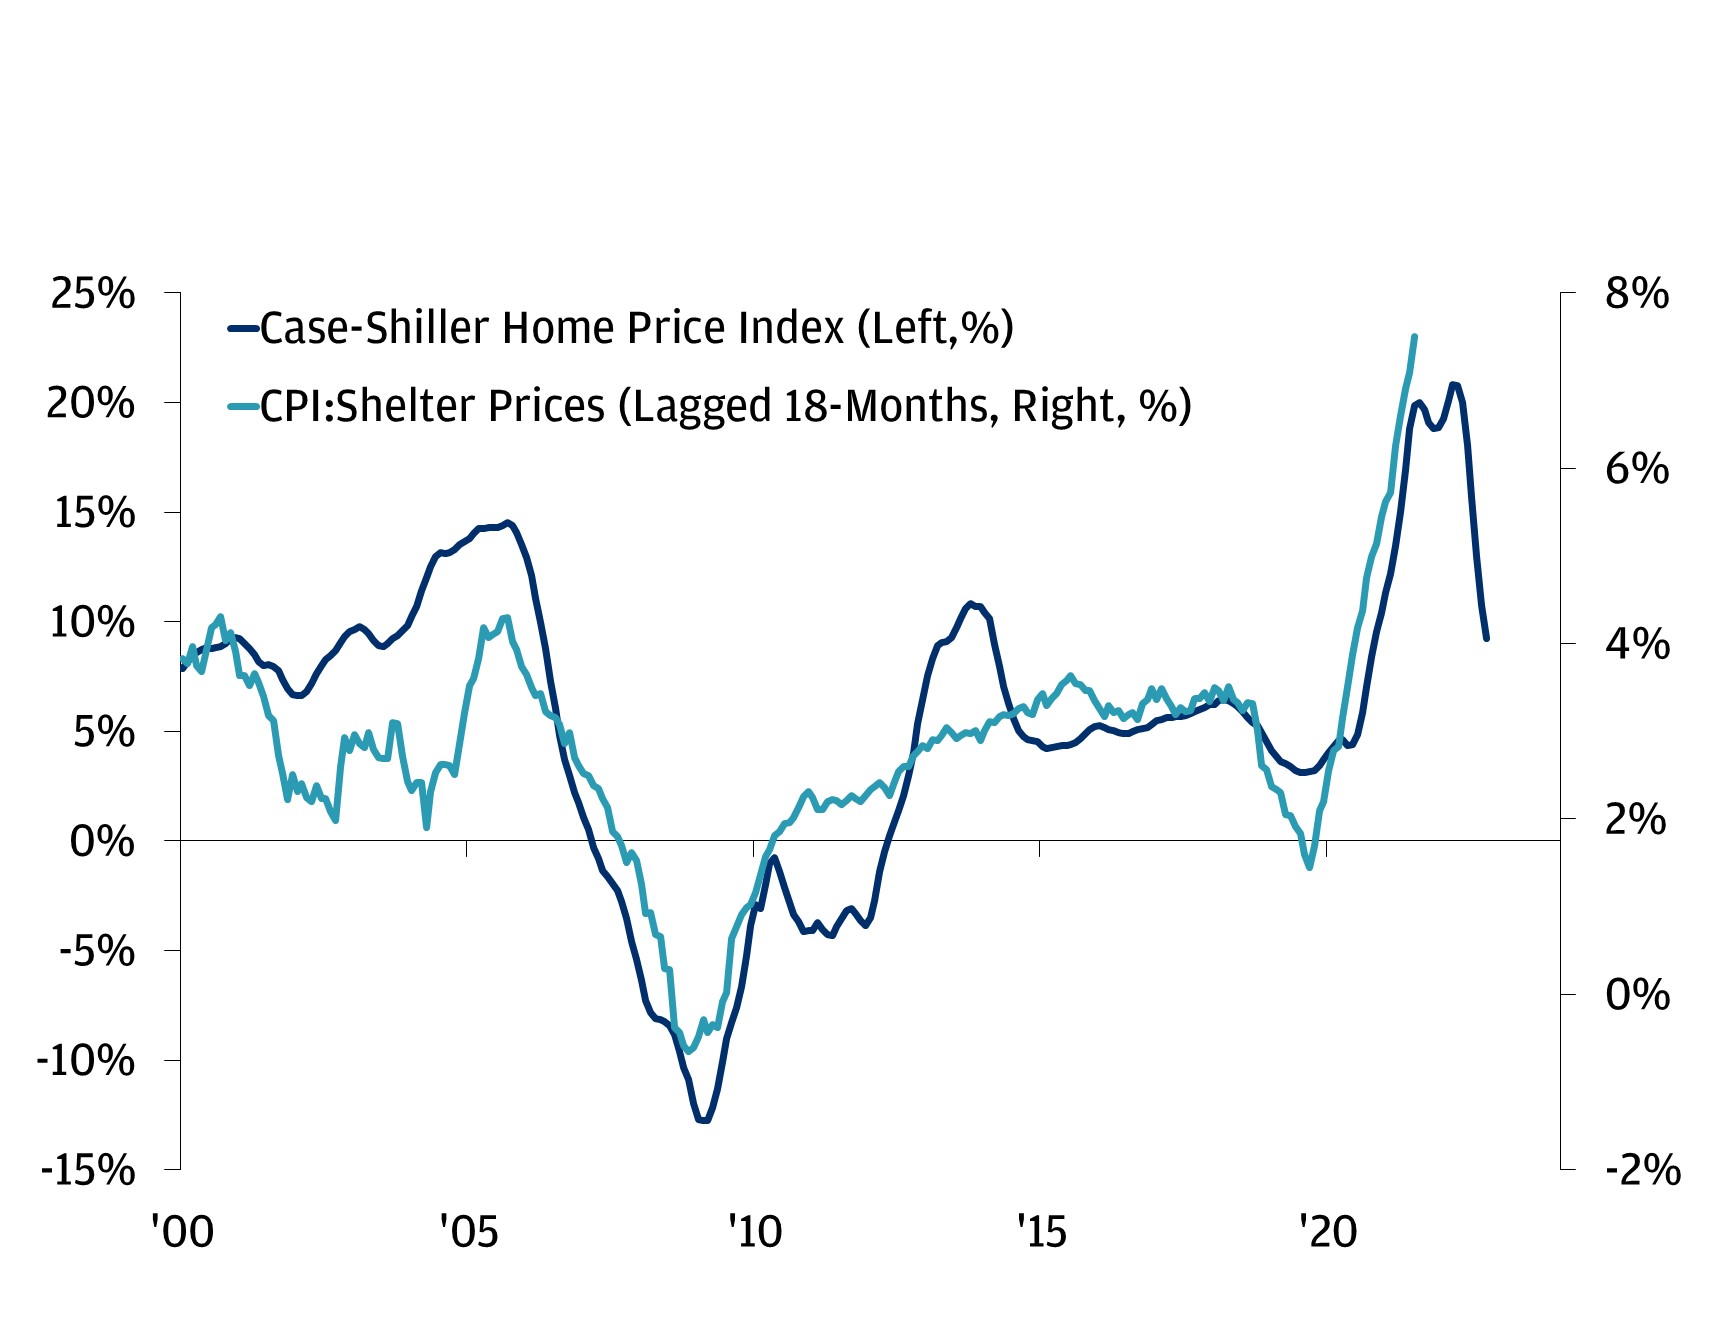 This chart shows the Case-Shiller National Home Price Index and the CPI shelter prices from January 2000 until October 2022.